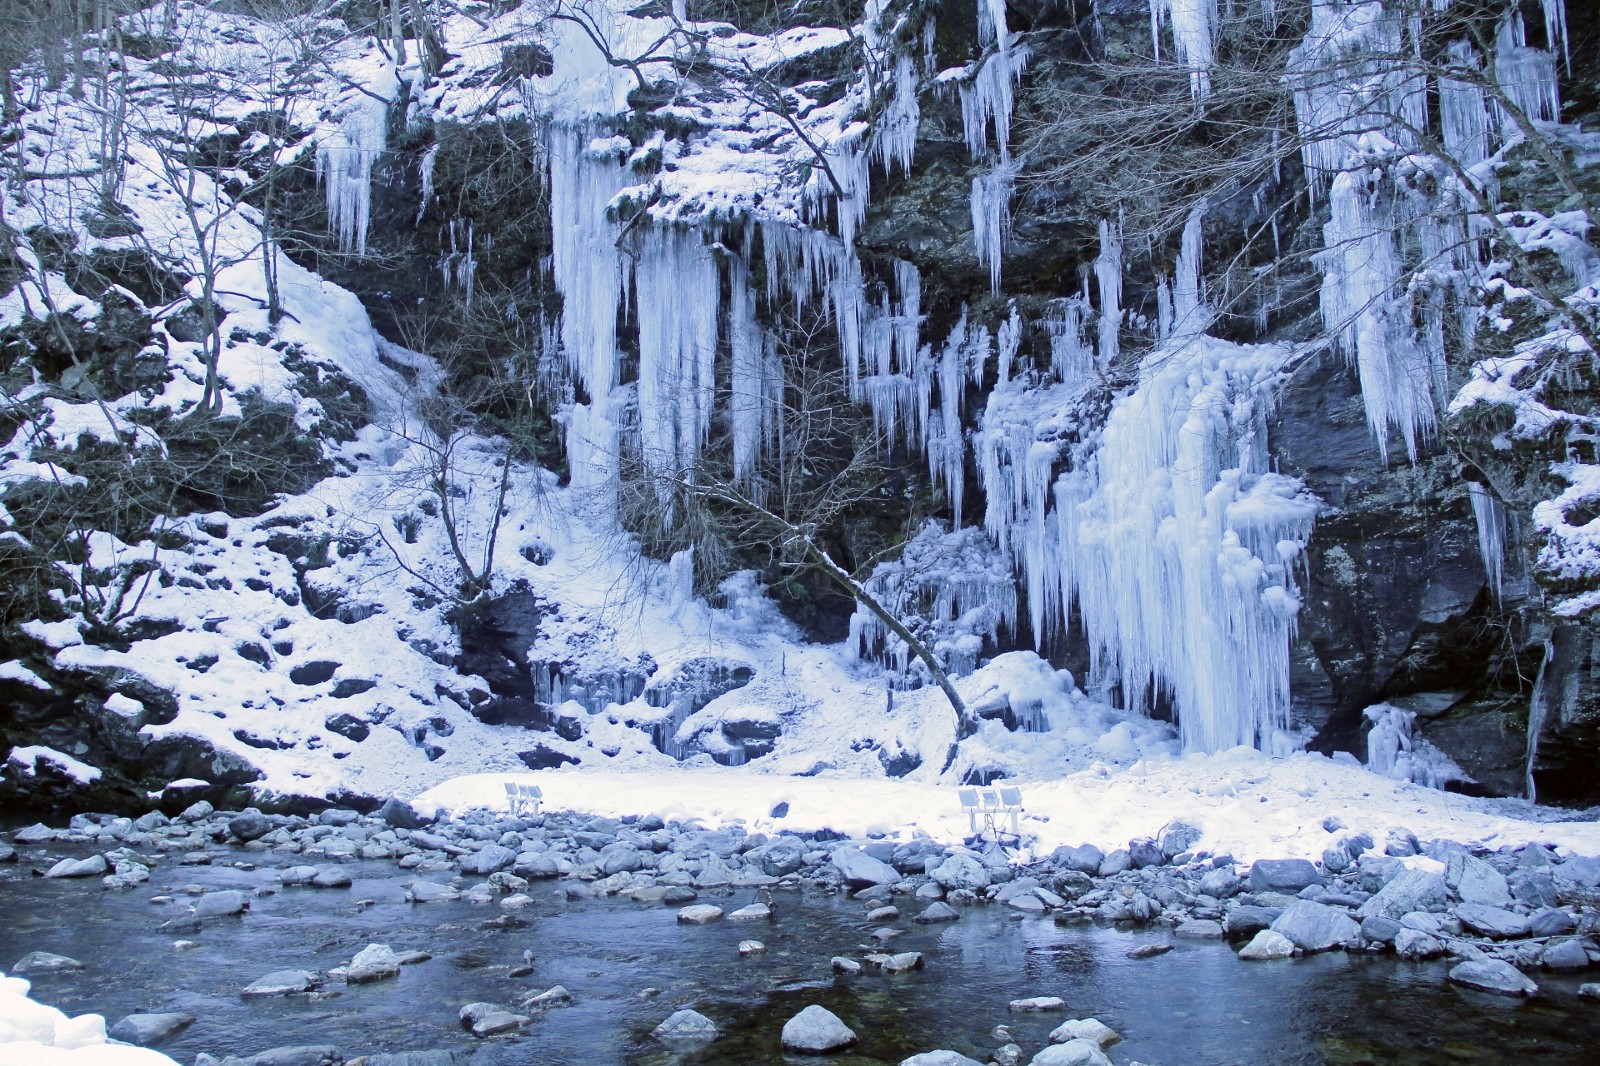 The natural art in winter: icicles of Misotsuchi